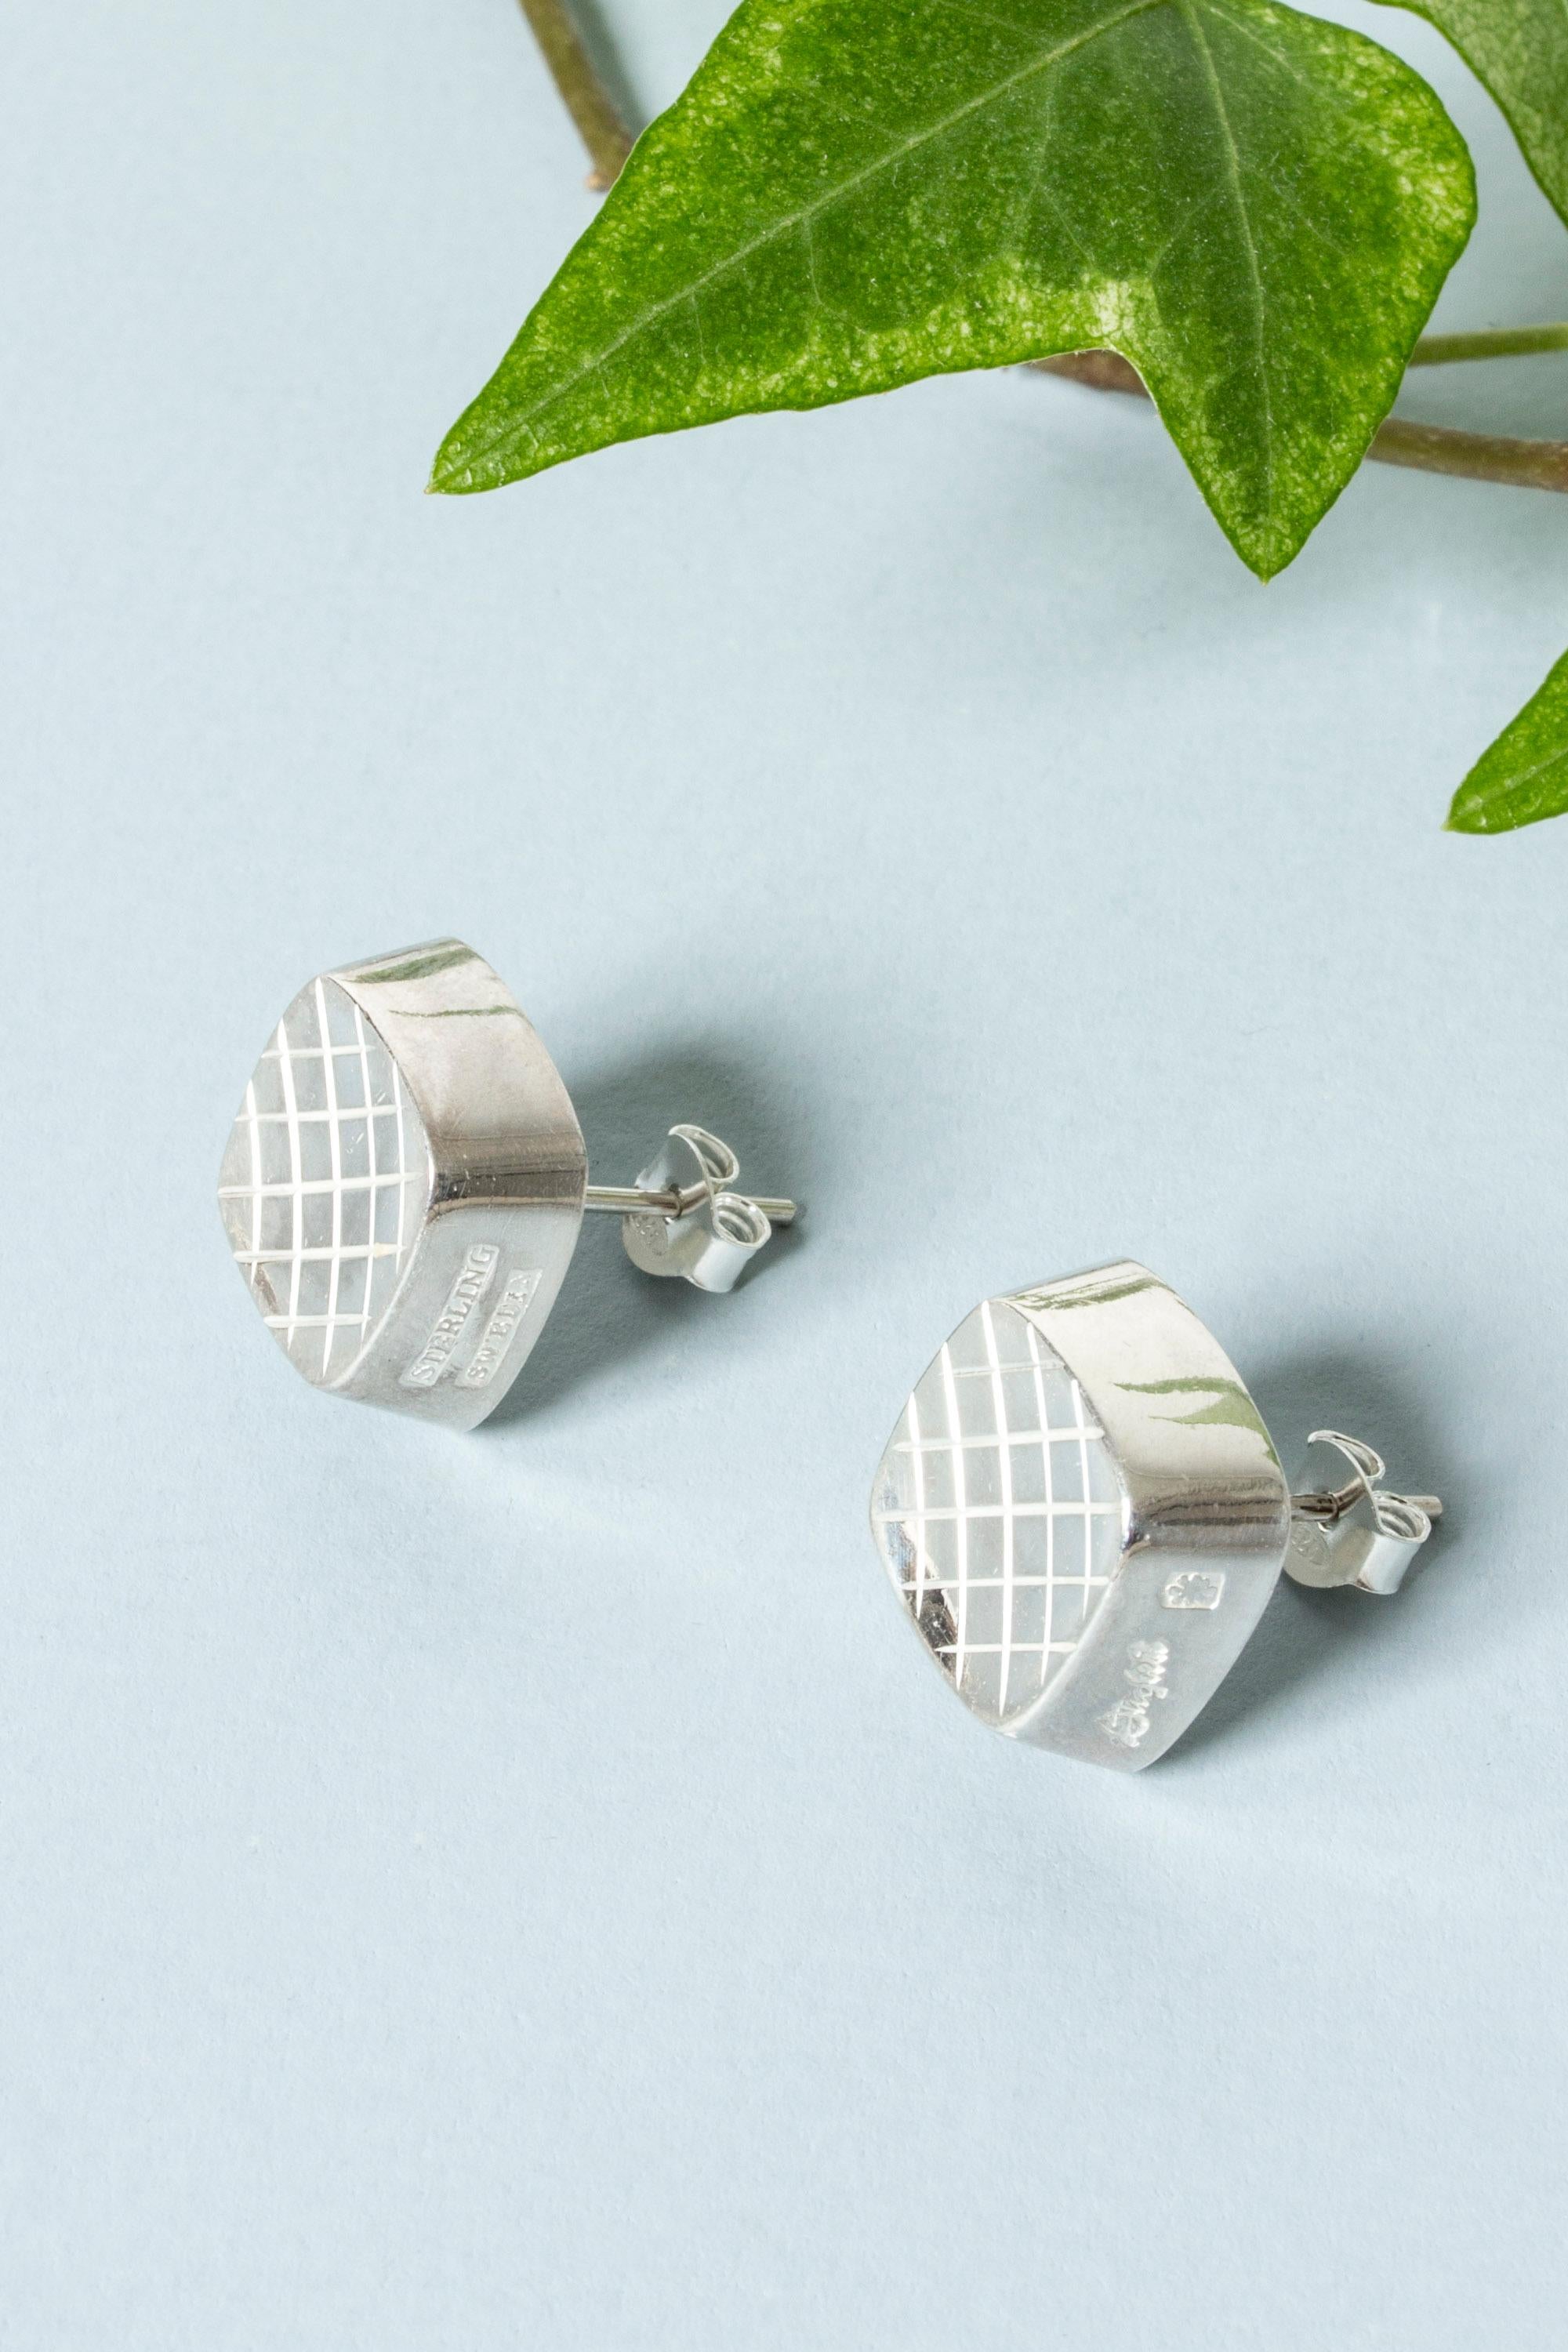 Pair of beautiful silver earrings from Stigbert, in an elegant bell-like form. Modernist, smooth design with organic influences.